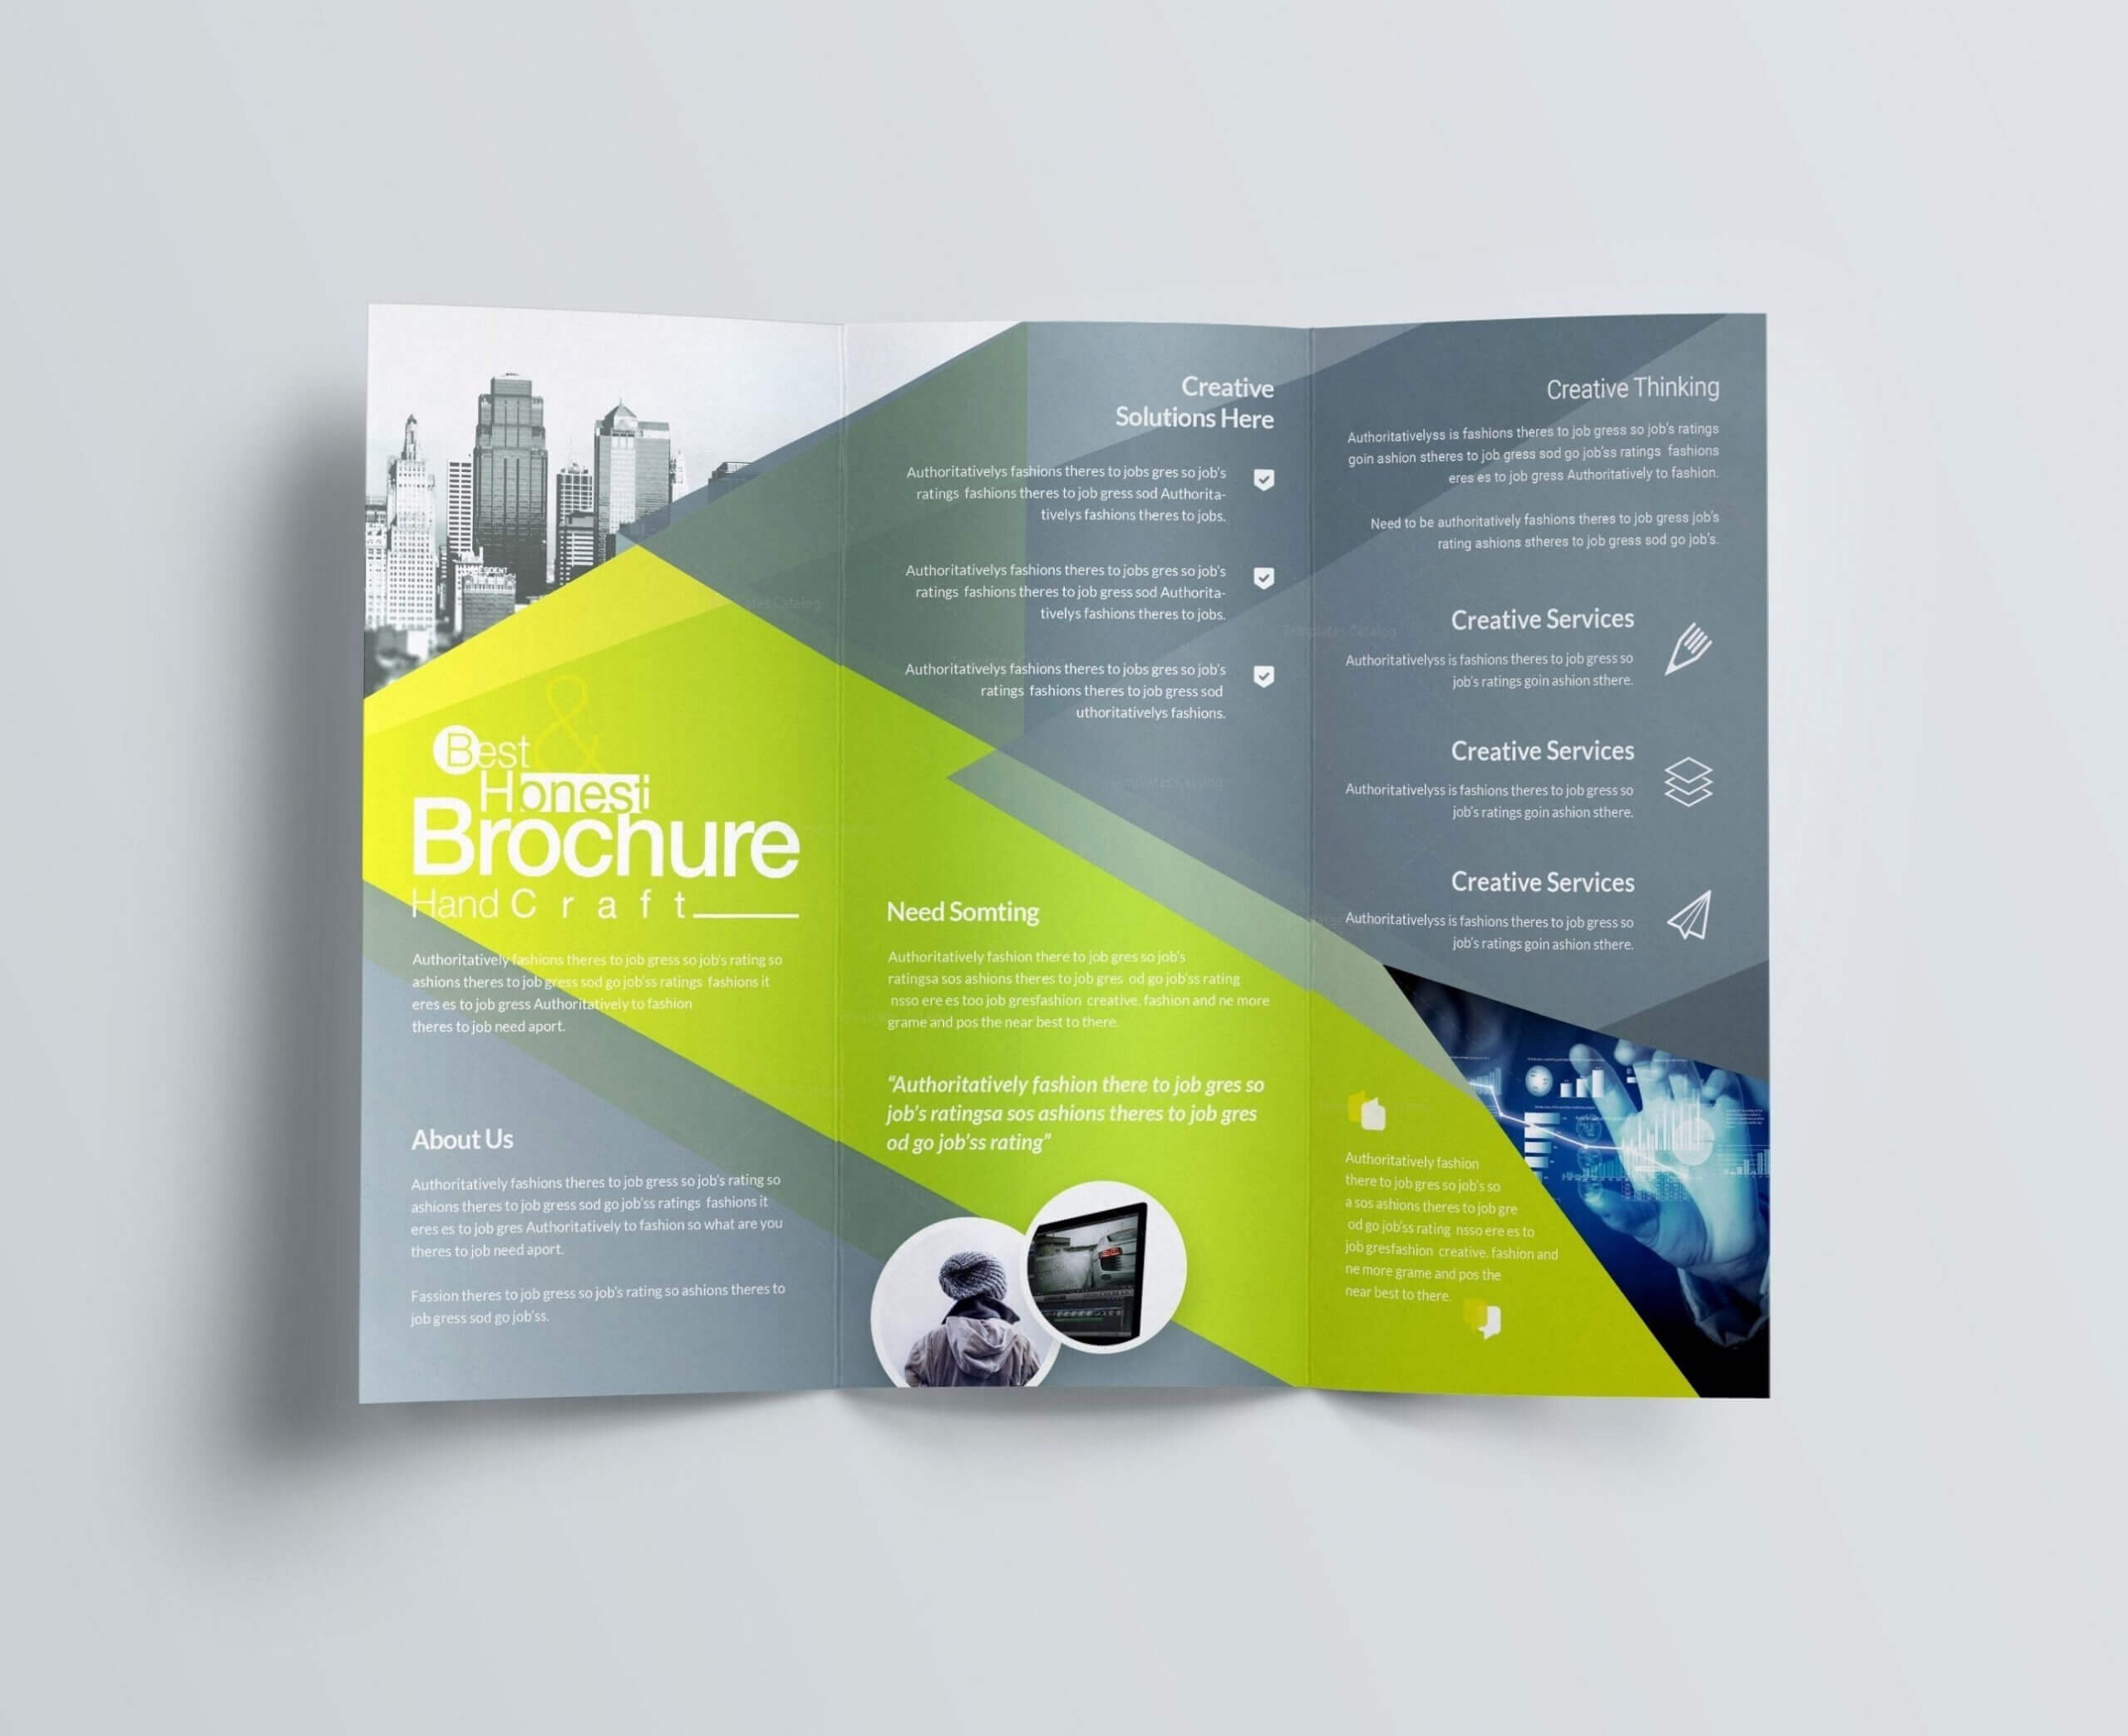 15D6 Free Brochure Template Downloads | Wiring Resources Pertaining To Science Brochure Template Google Docs